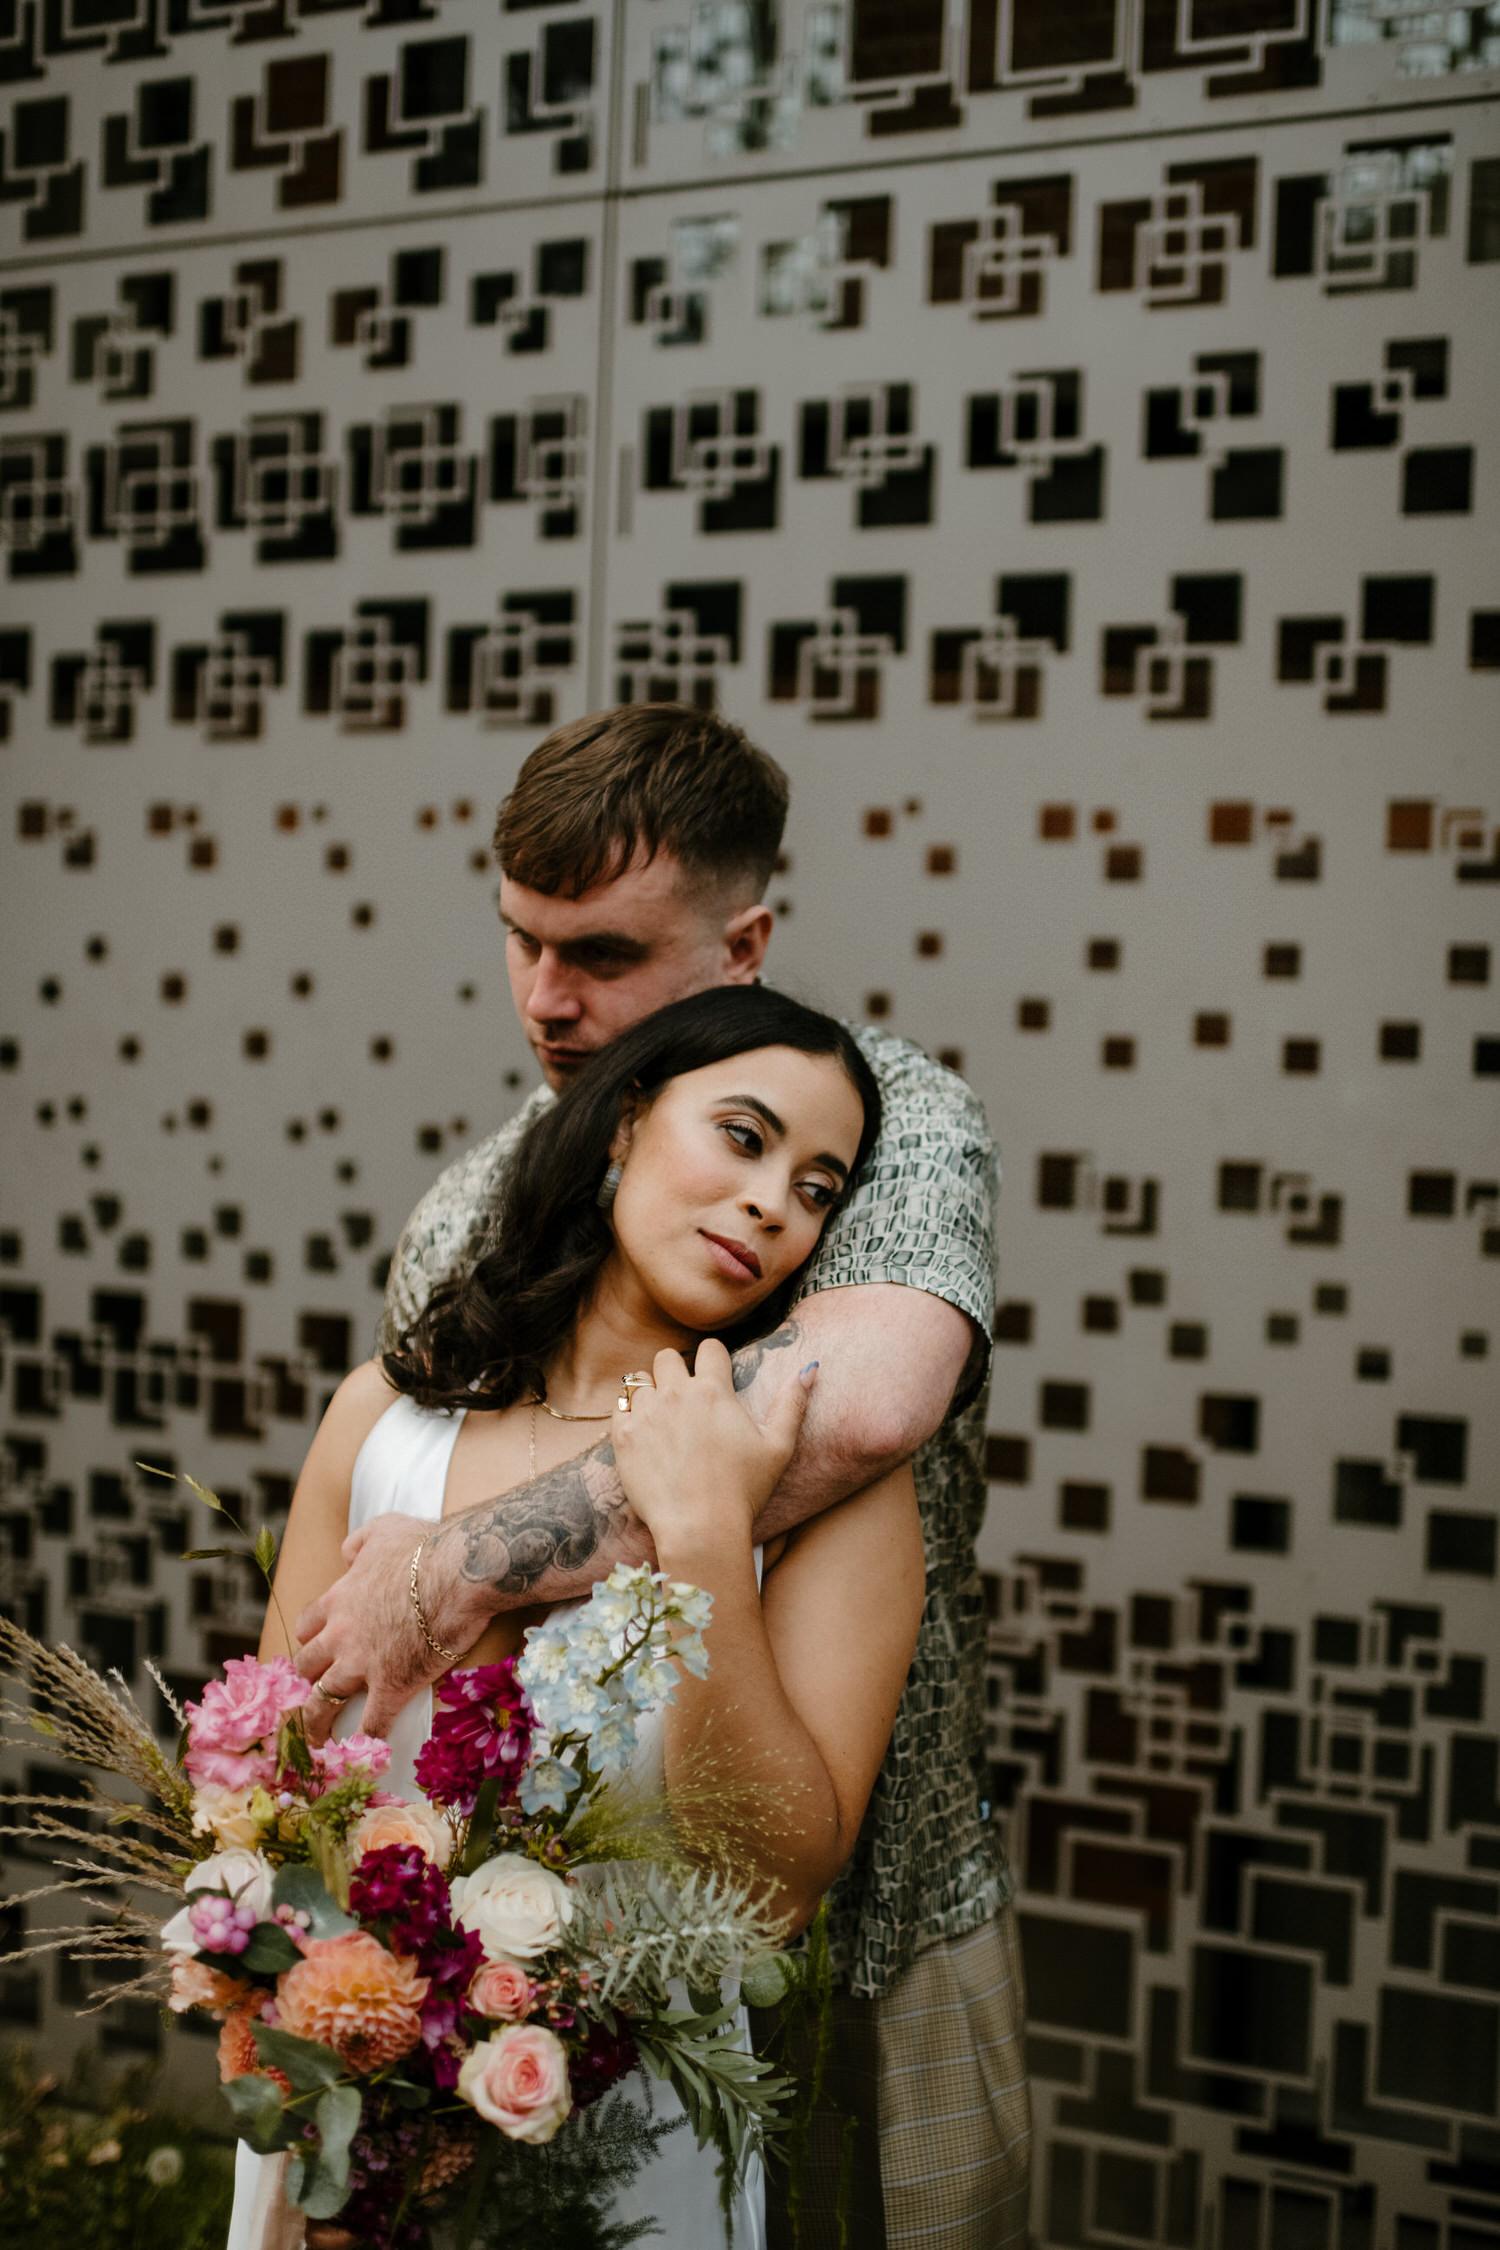 Modern alternative wedding photography by Ellie Gillard in London. A casually dressed groom holds his bride as she rests her head on his shoulder. She's carrying a bold red and pink bouquet